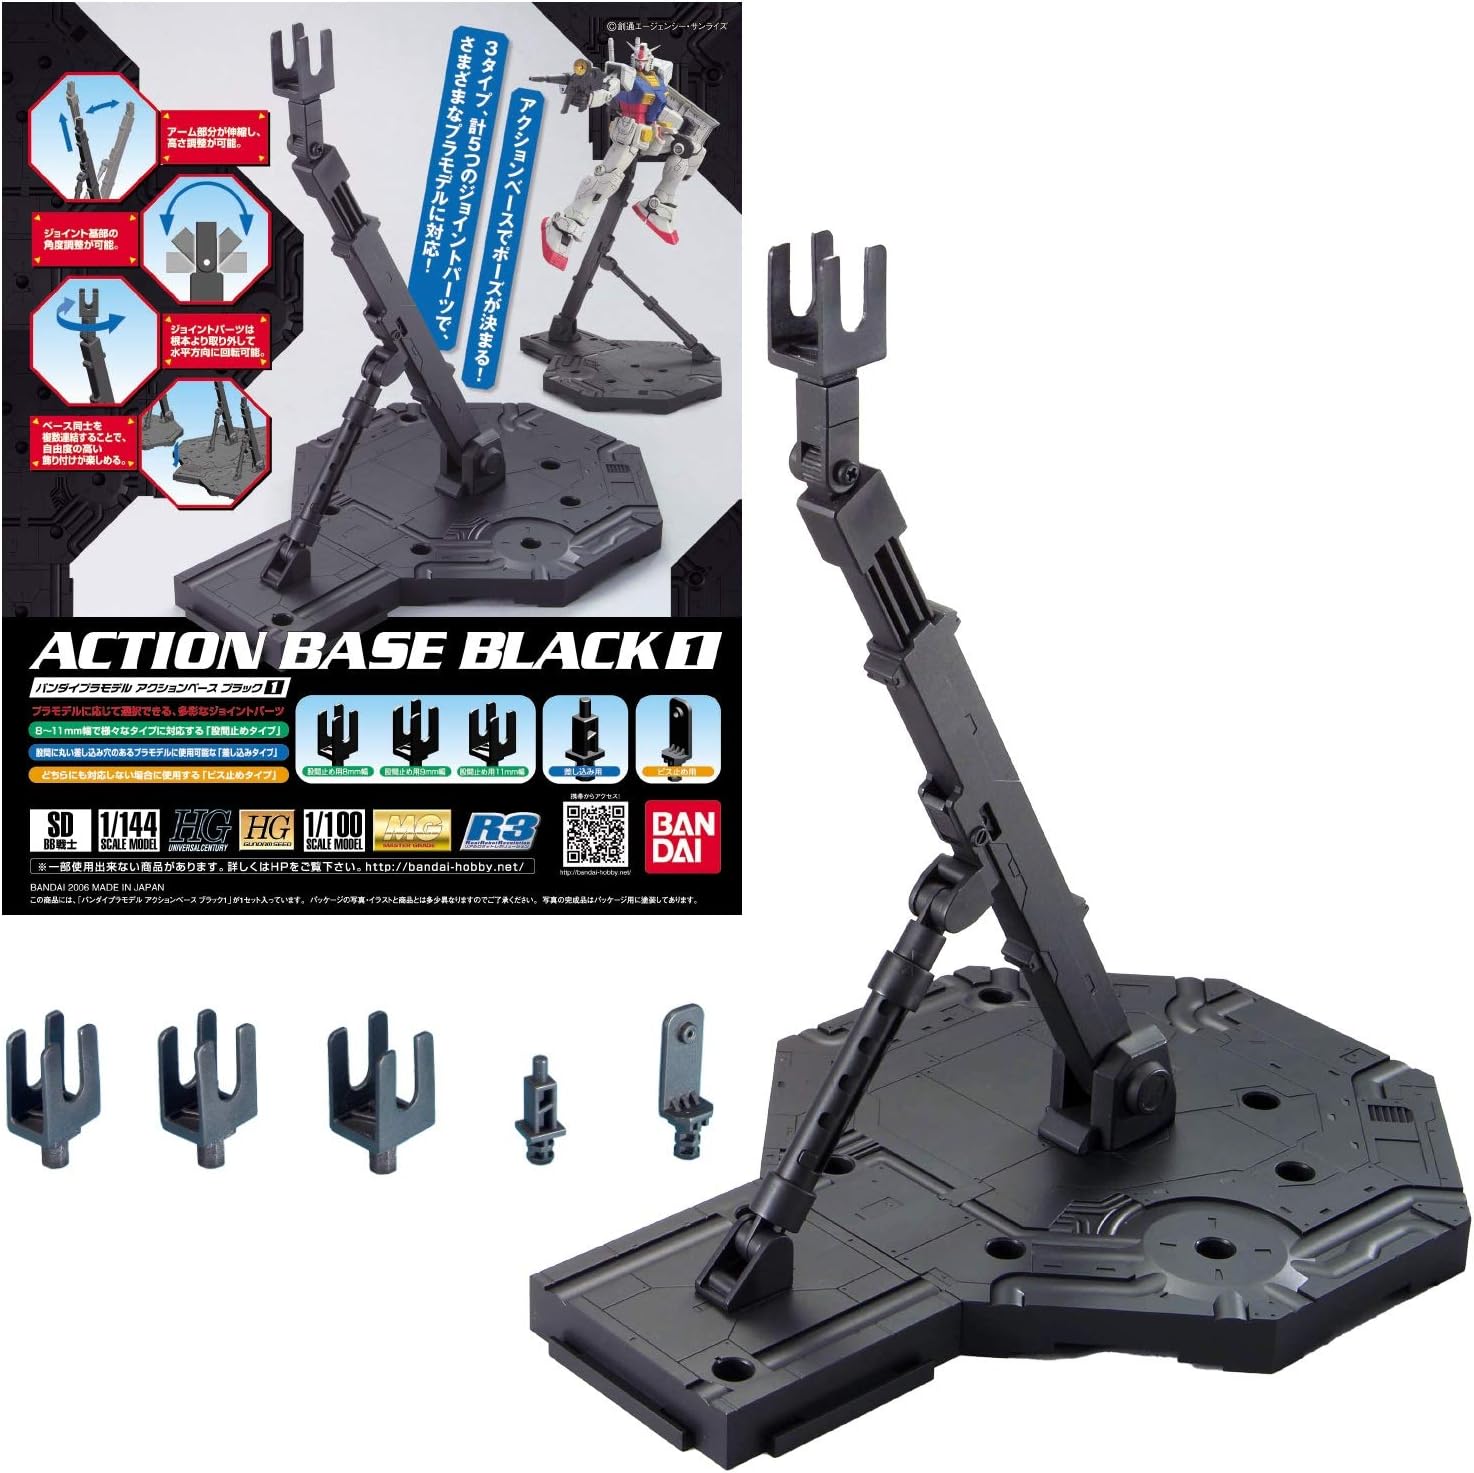 Bandai Hobby Action Base 1 Display Stand (1/100 or 1/144 Scale) - Bards & Cards